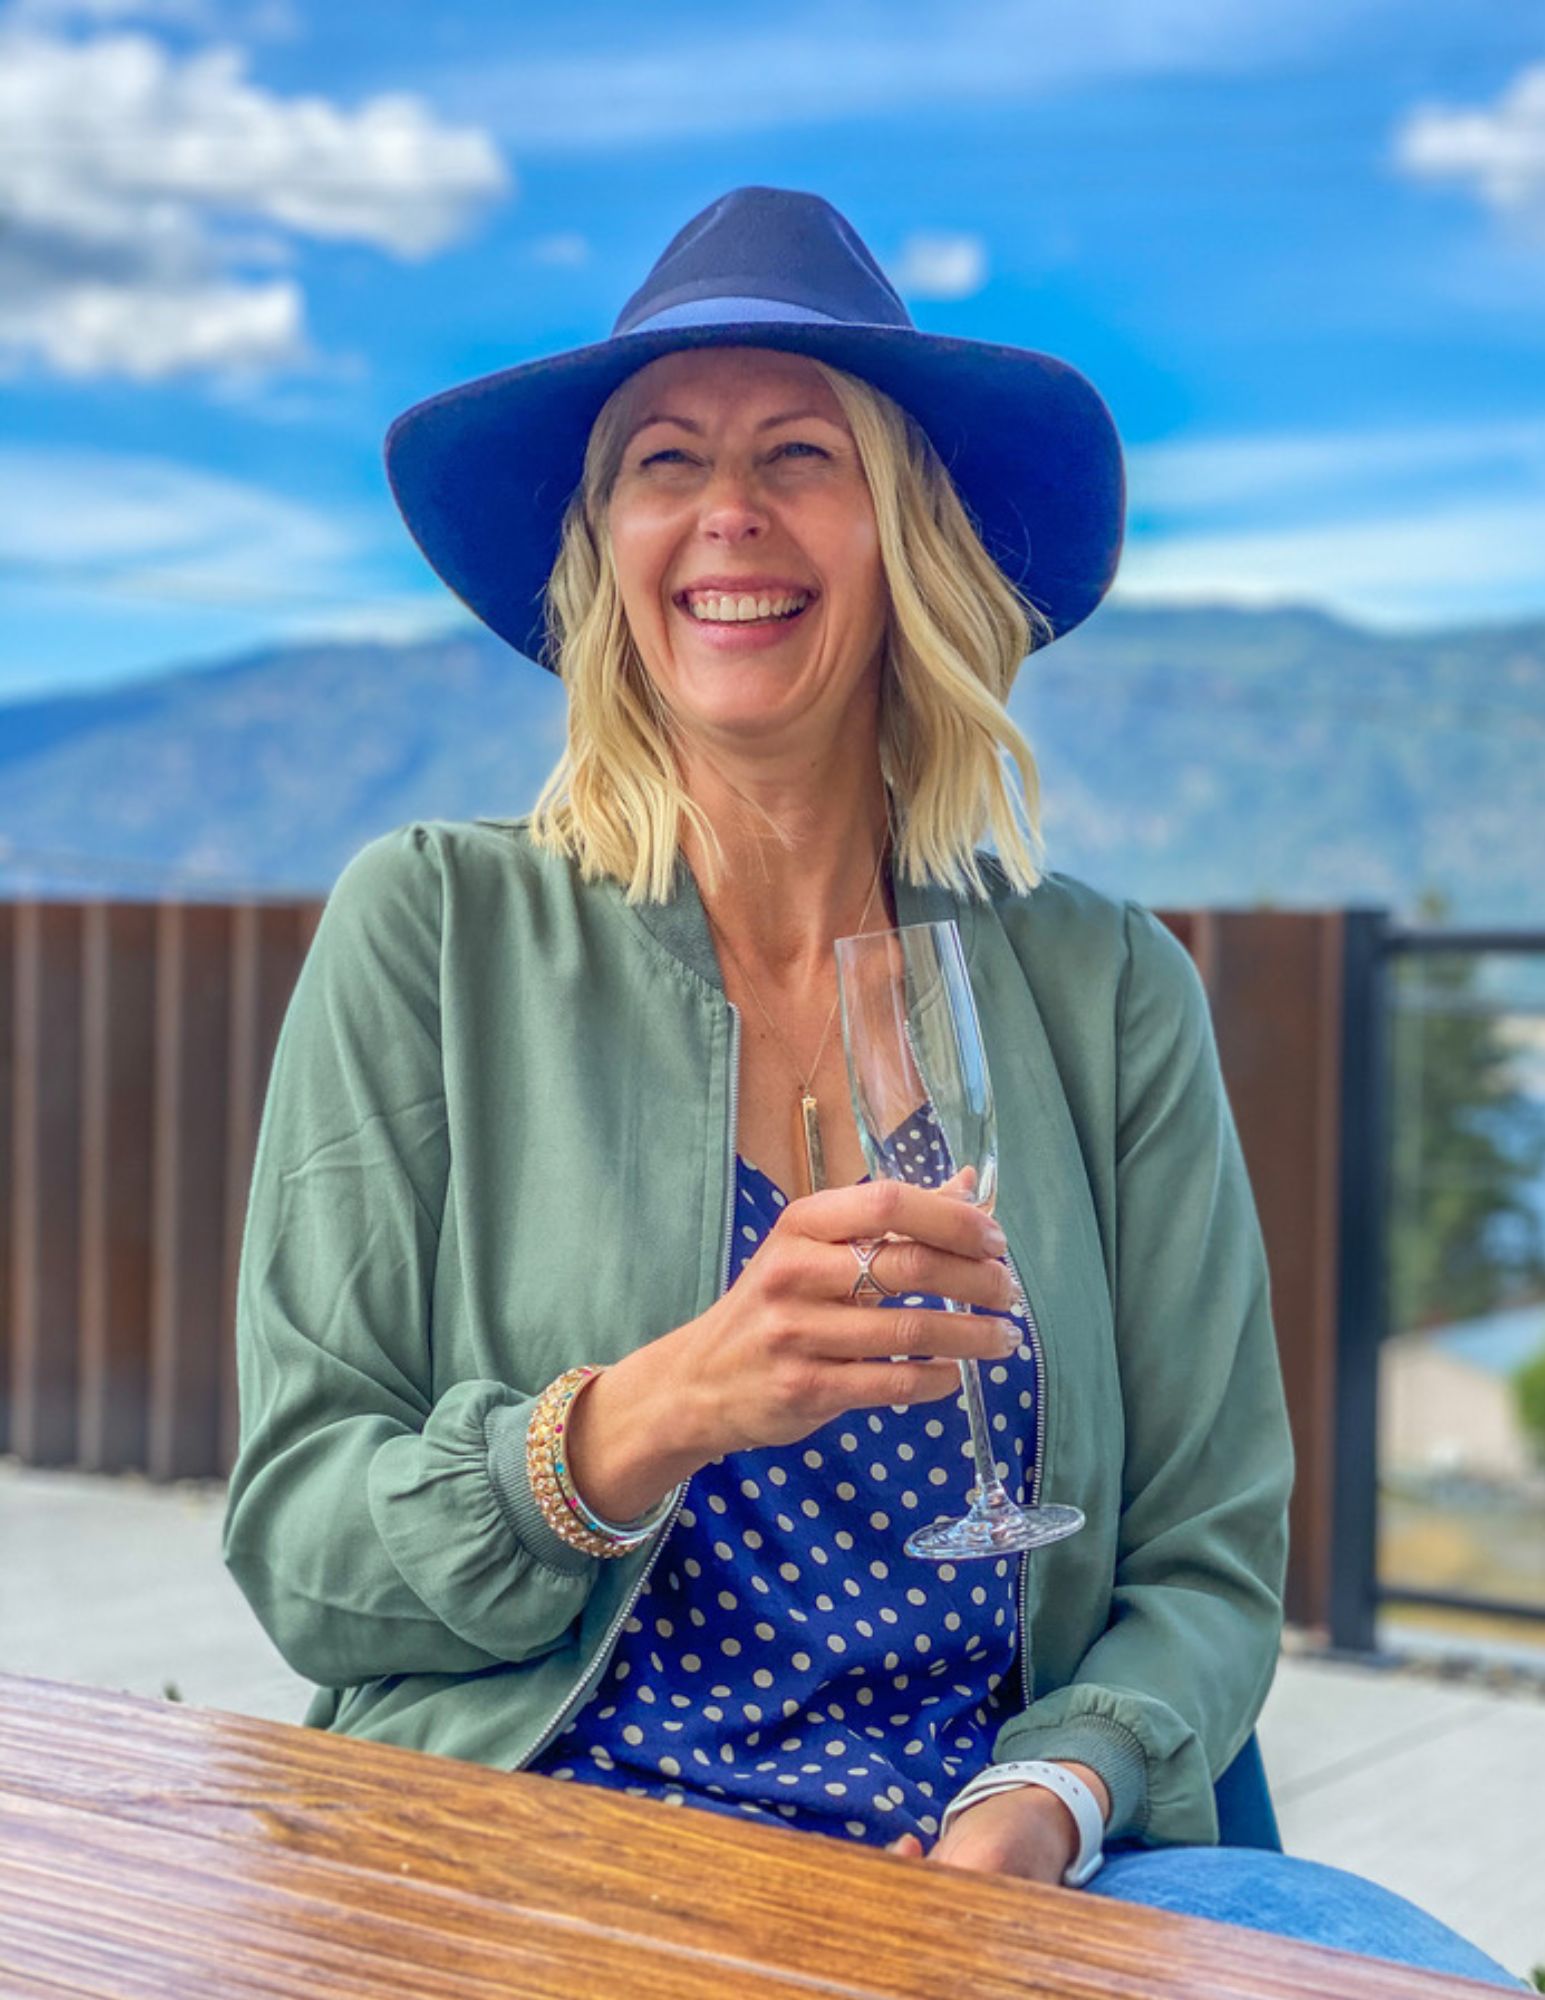 woman laughing holding champagne glass in wine country in british columbia